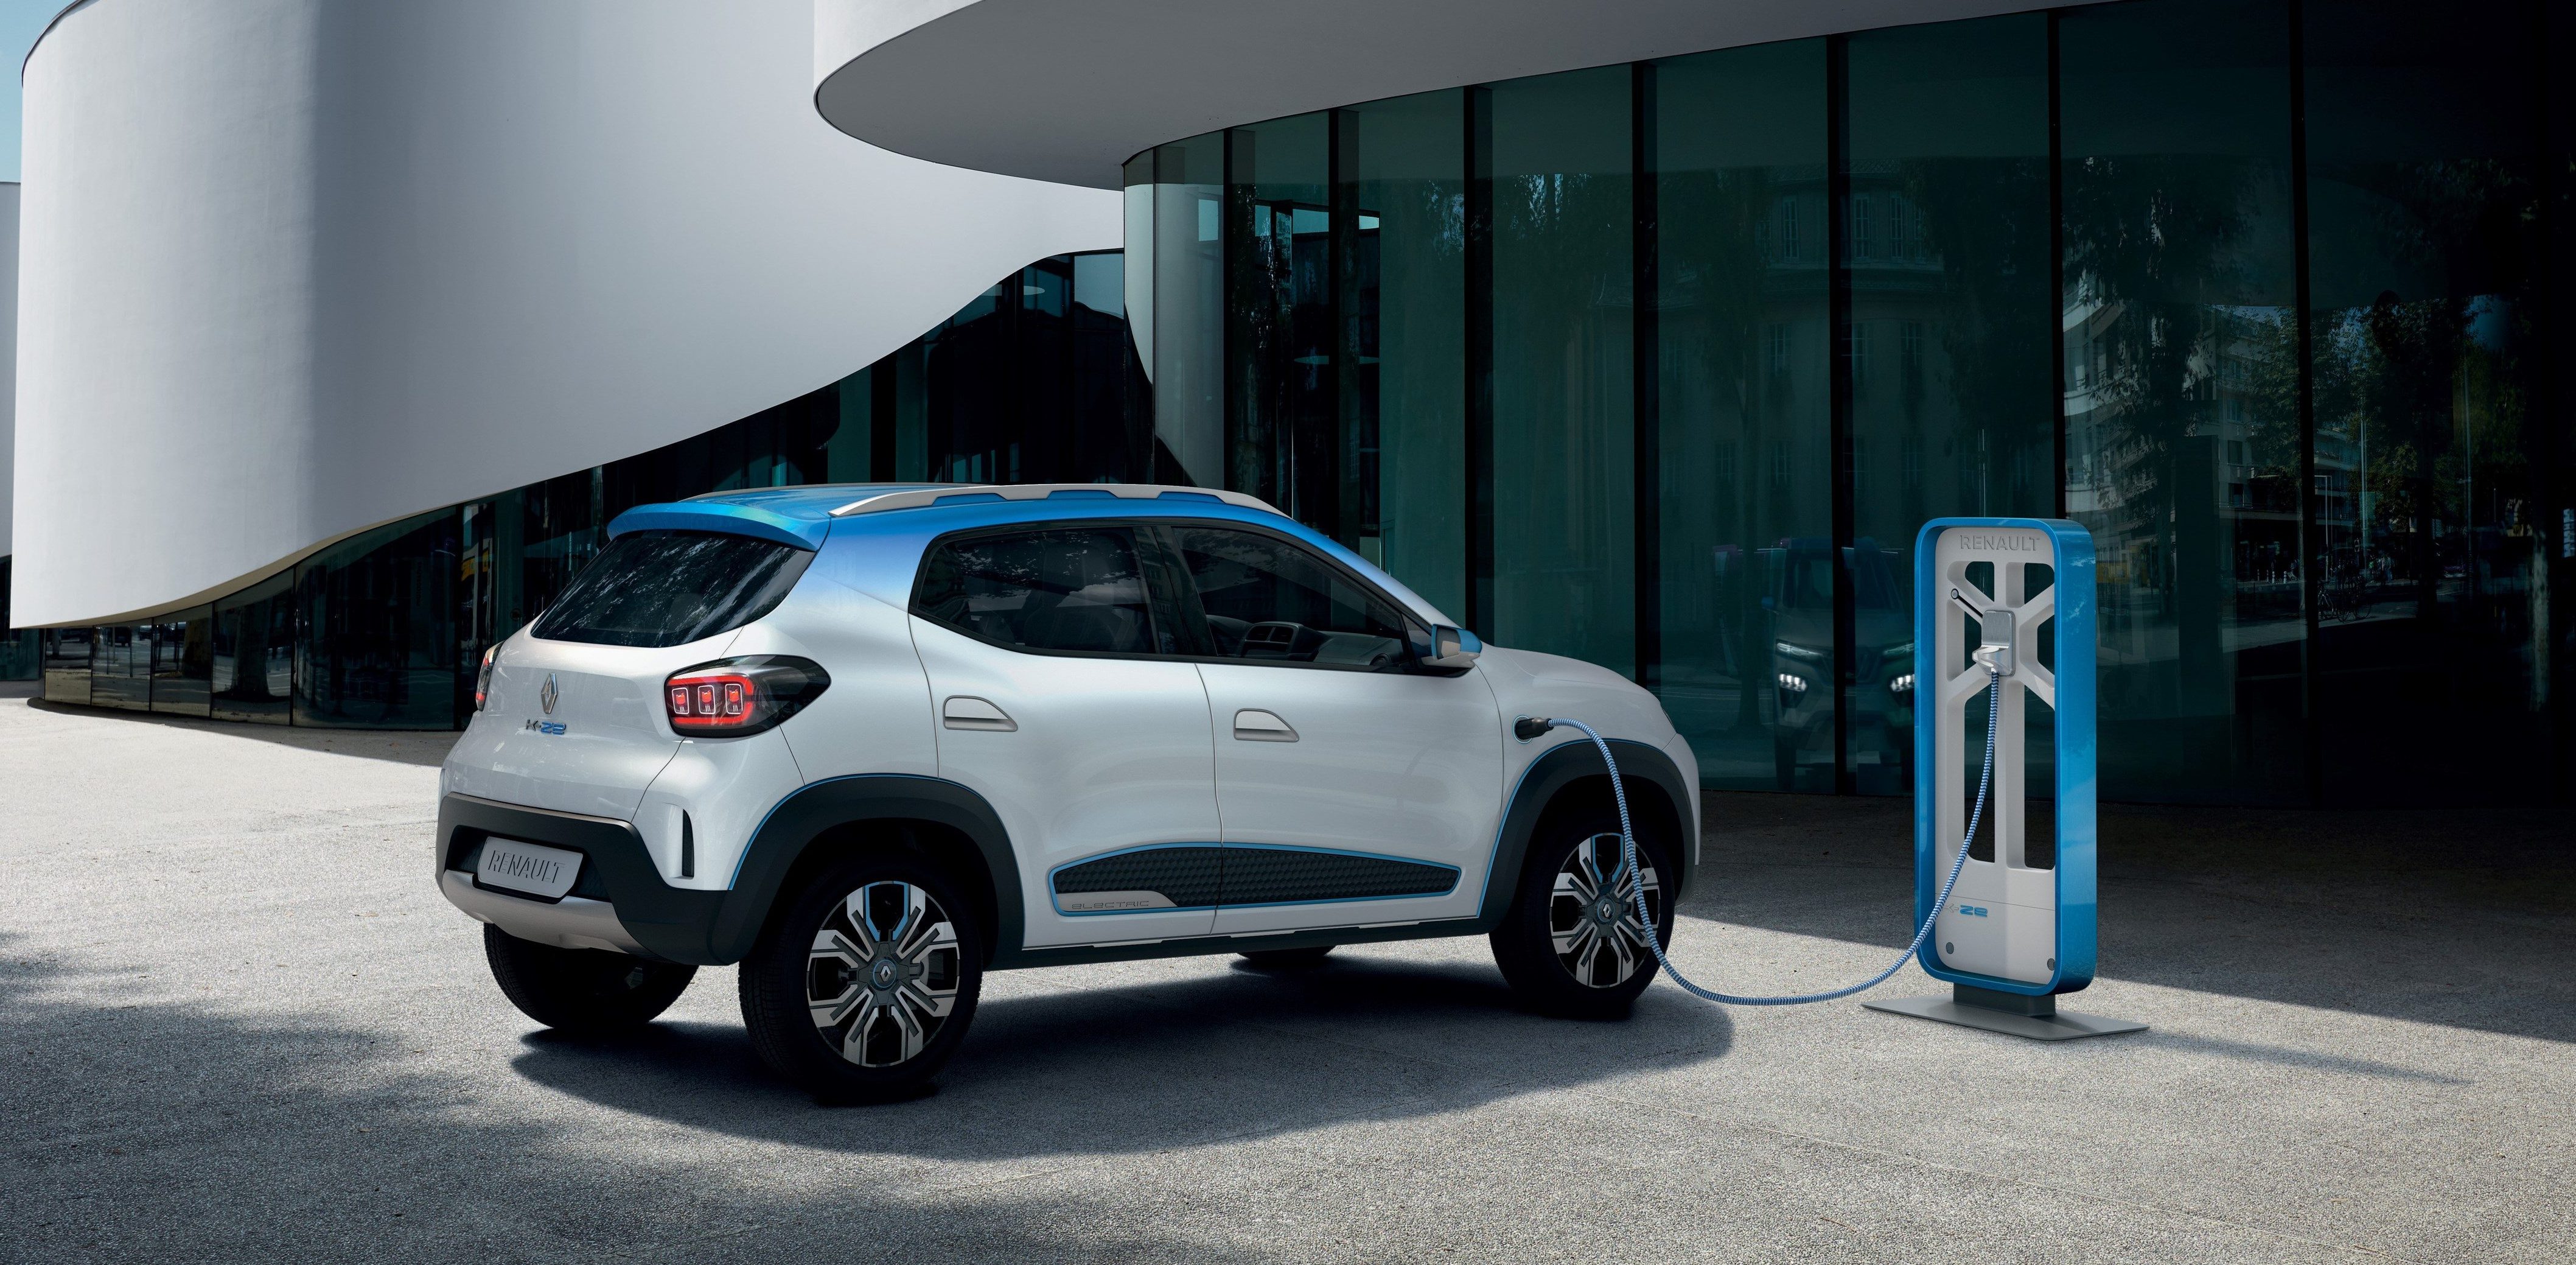 Renault unveils new 'affordable' K-ZE all-electric crossover